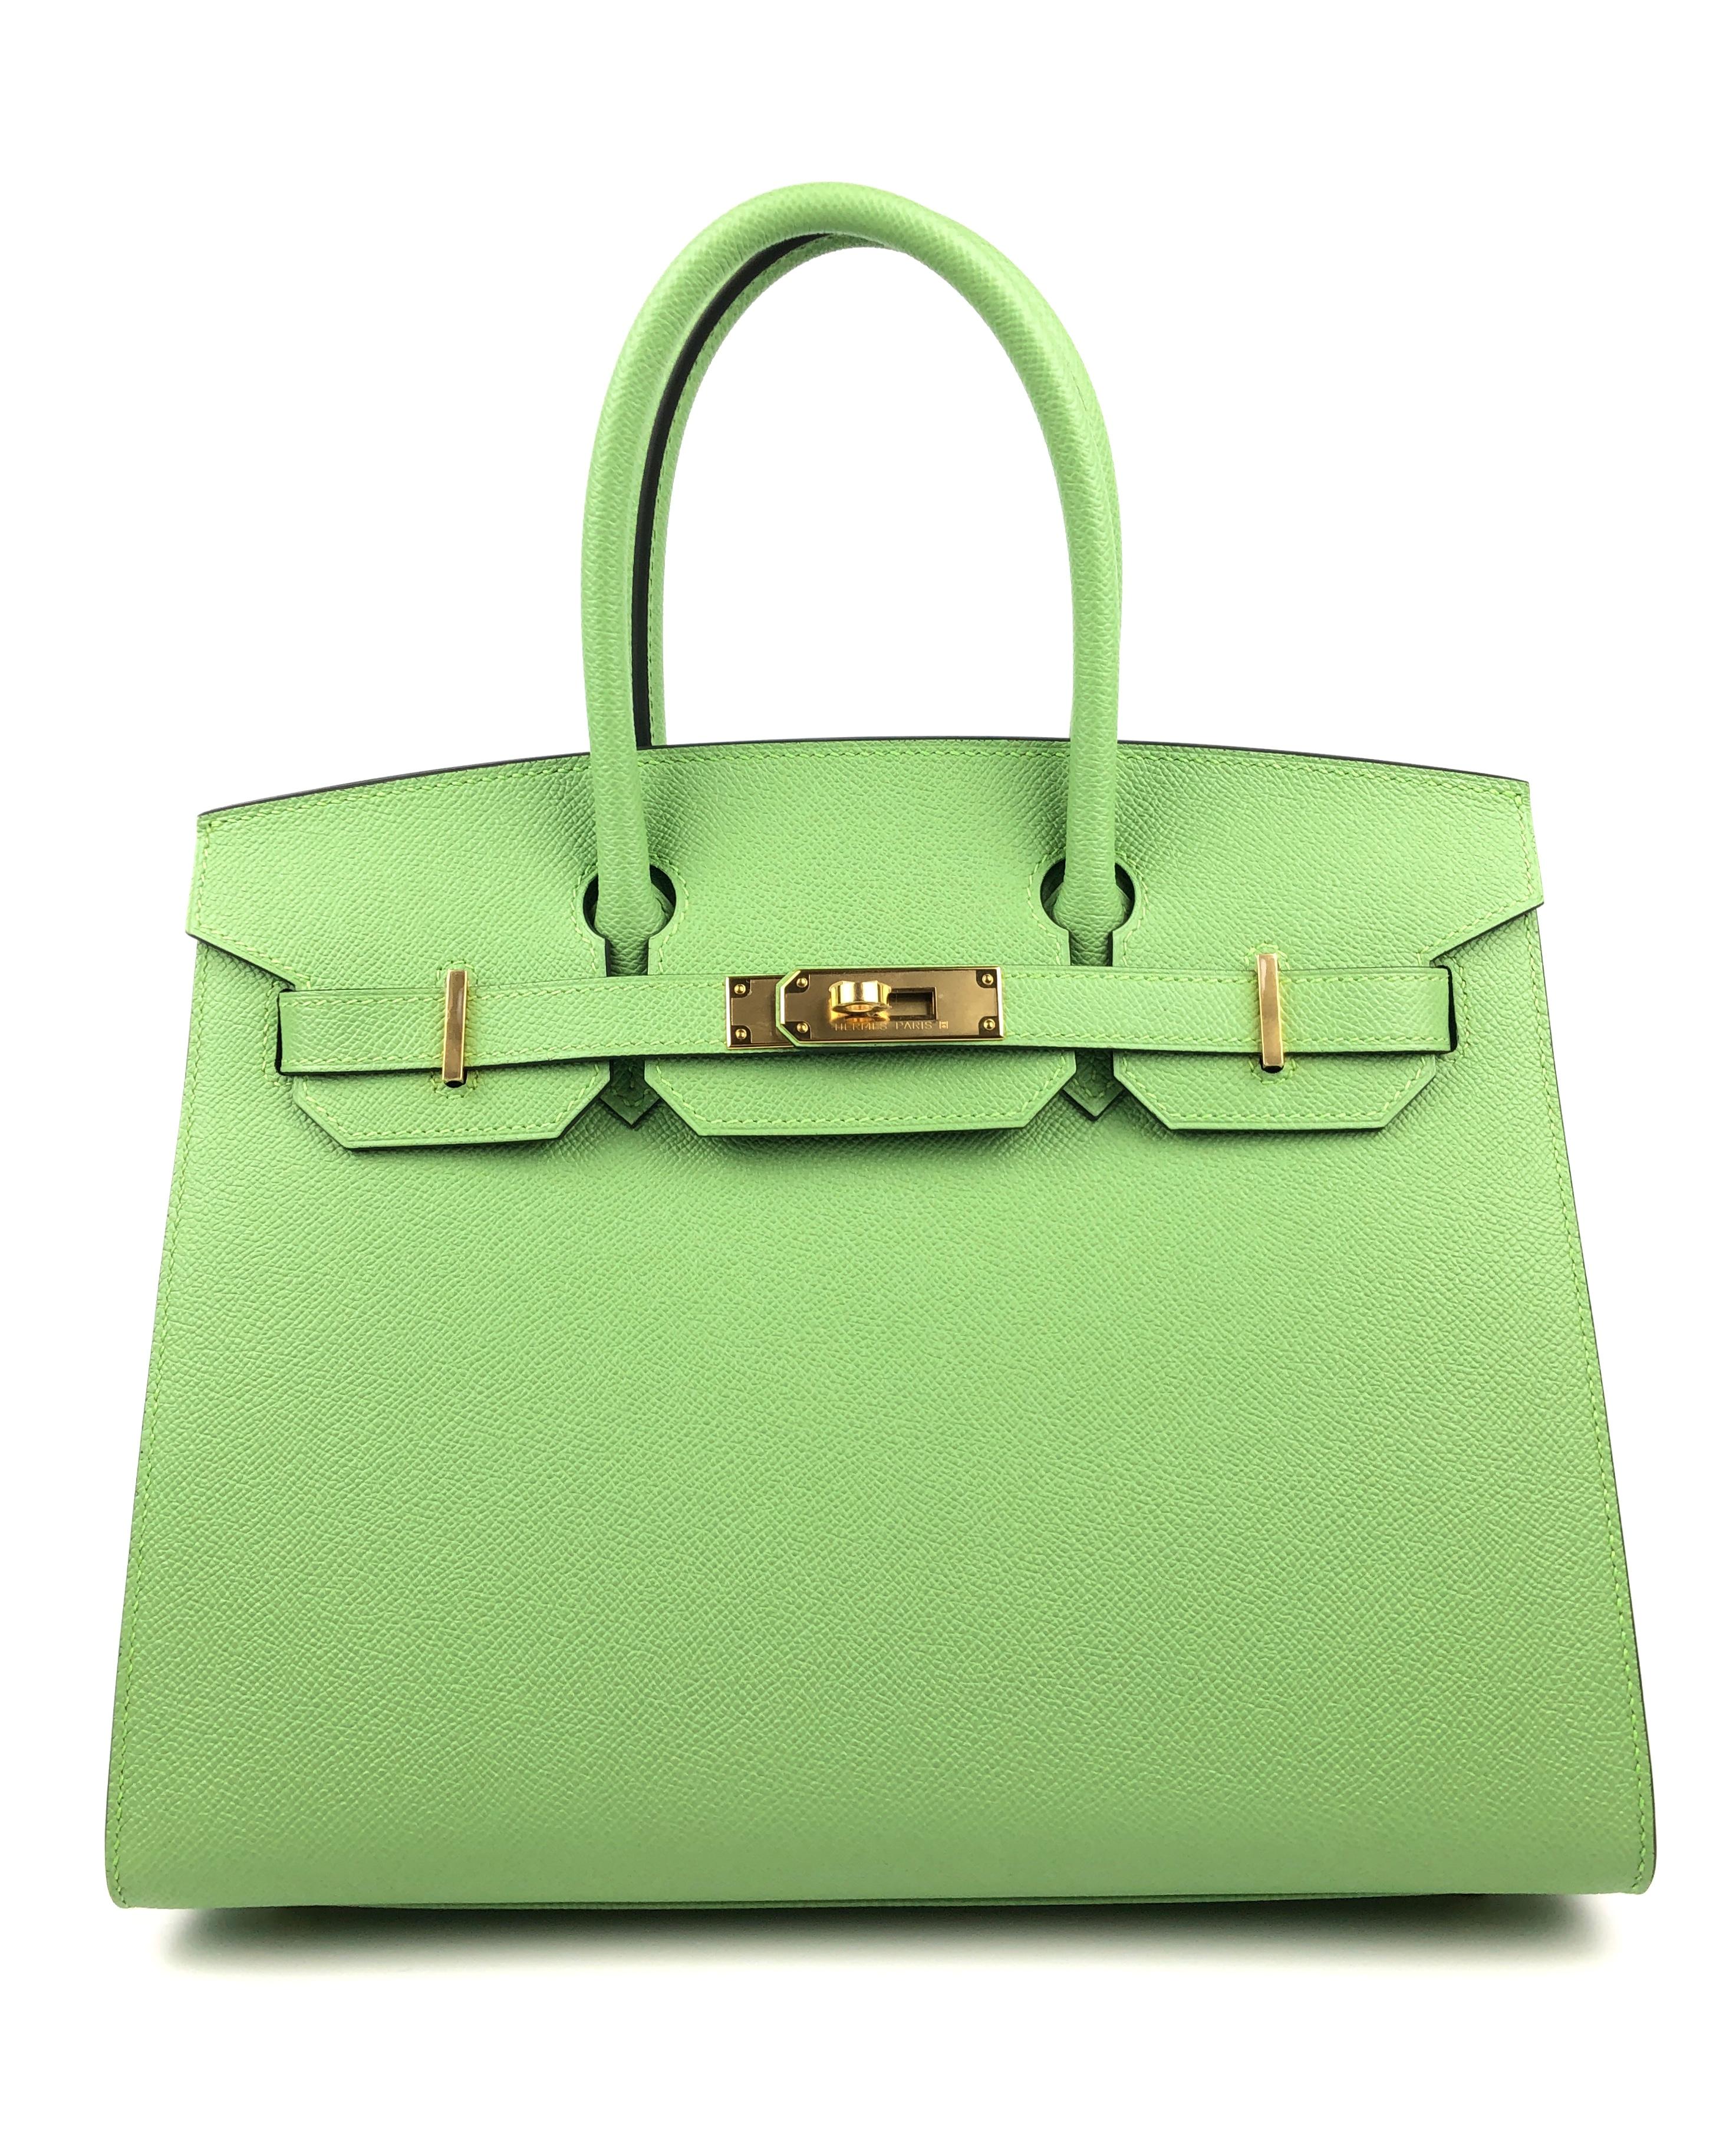 Ultra Rare and the Only ONE on eBay! Brand New Hermes Birkin 30 Sellier Vert Criquet Epsom Leather Gold Hardware. 
New Y Stamp 2020 full set.

Shop With Confidence from Lux Addicts. We are a Platinum Top Trusted Seller on 1stDibs. 
Authenticity